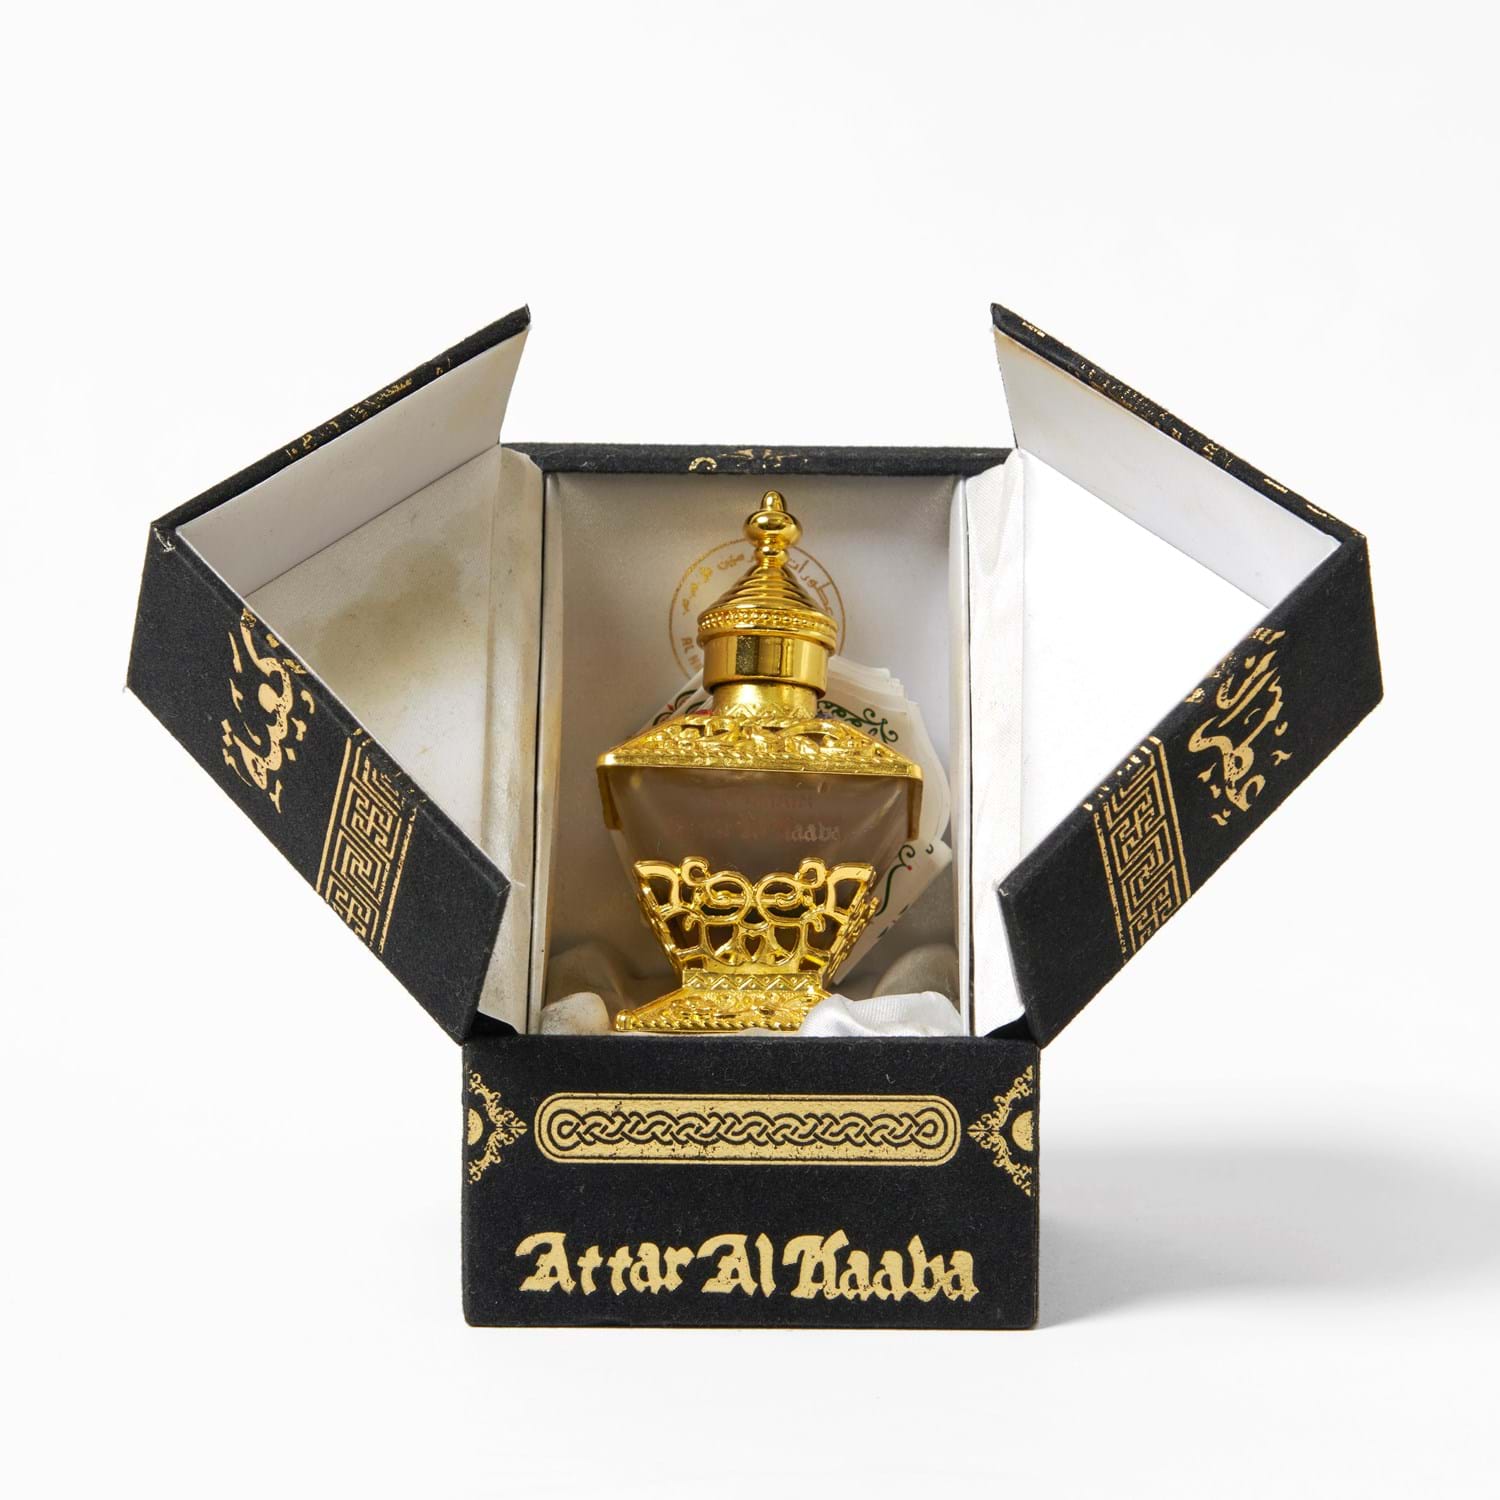 Black box with gold writing in English and Arabic script. Inside the box is a glass bottle with gold embellishments.